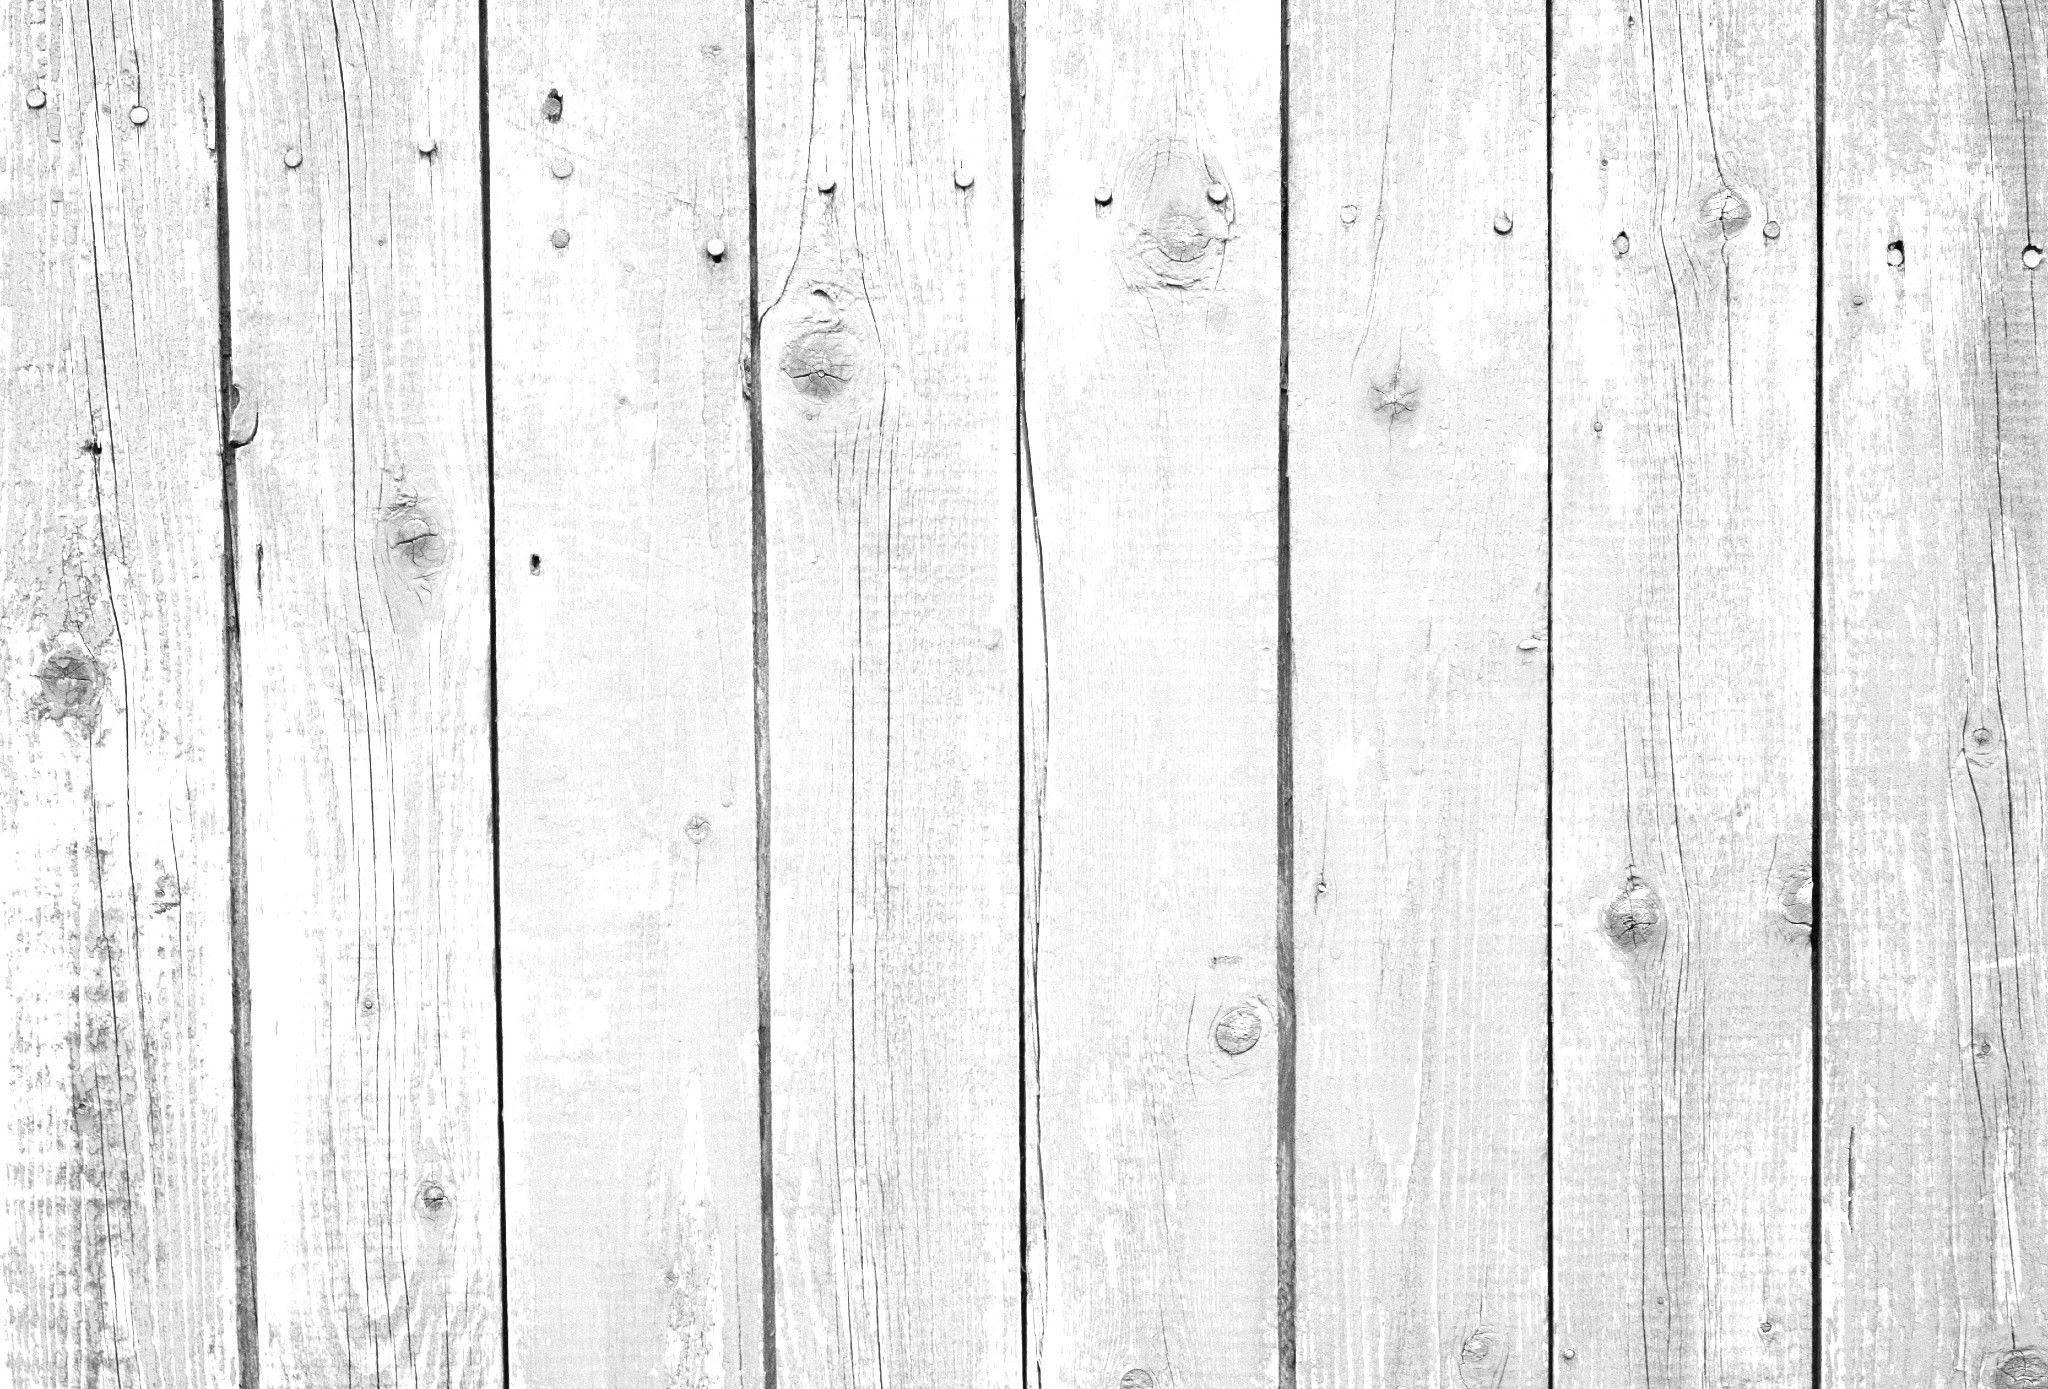 White Rustic Wood Background Design